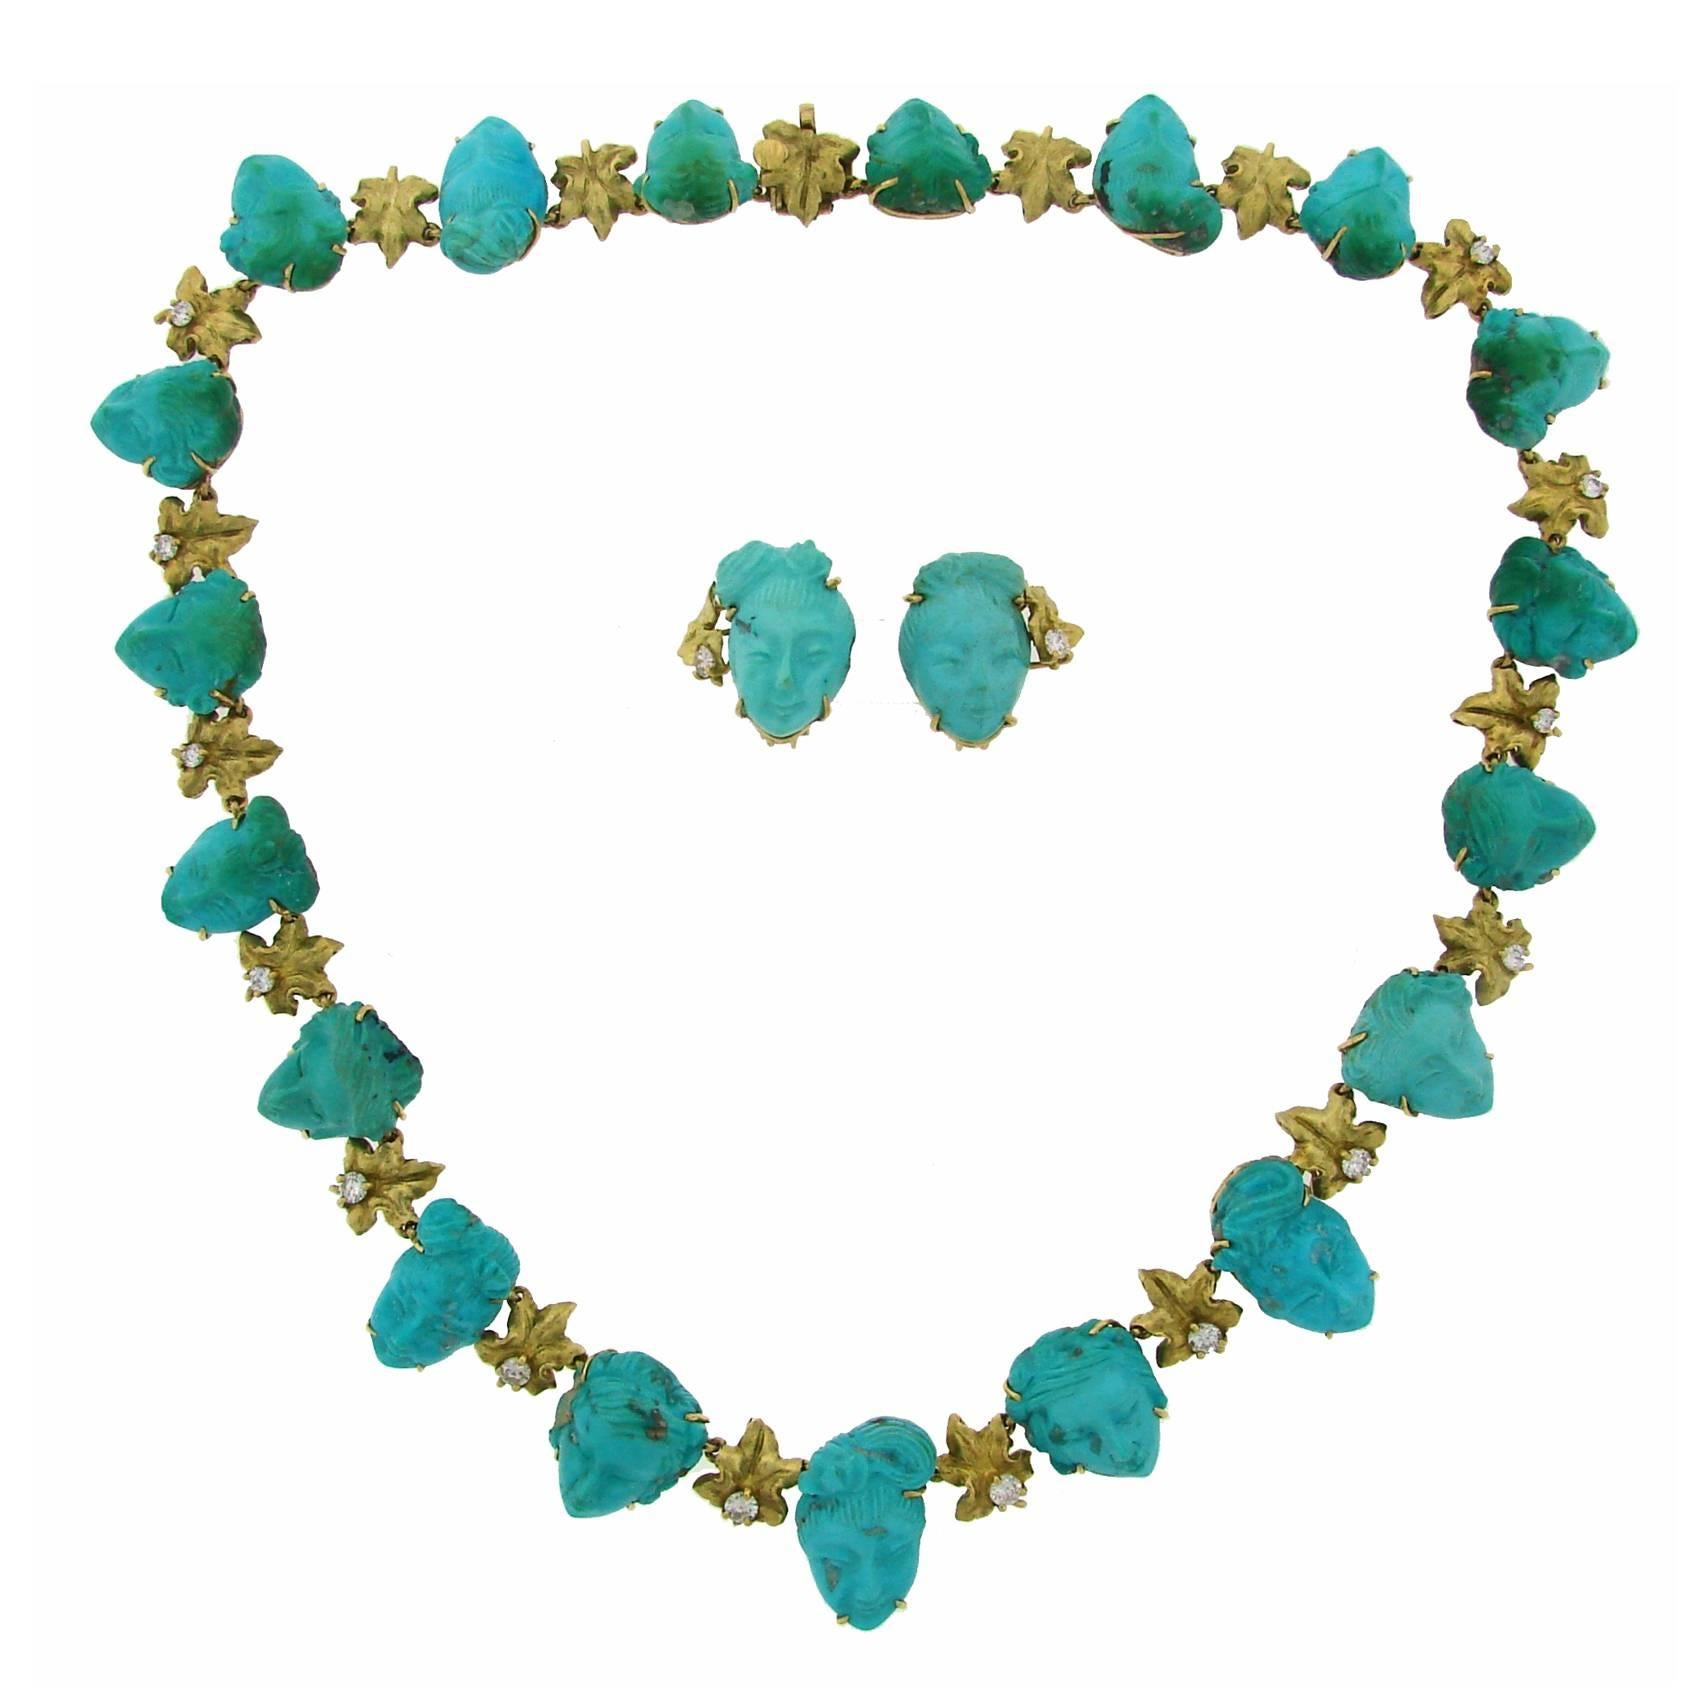 Very unusual artsy necklace created in the 1940's. Features nineteen women's profile carved of turquoise set in 18k (stamped) yellow gold and accented with round full cut diamonds (total weight approximately 1.40 carats). 
Definitely a